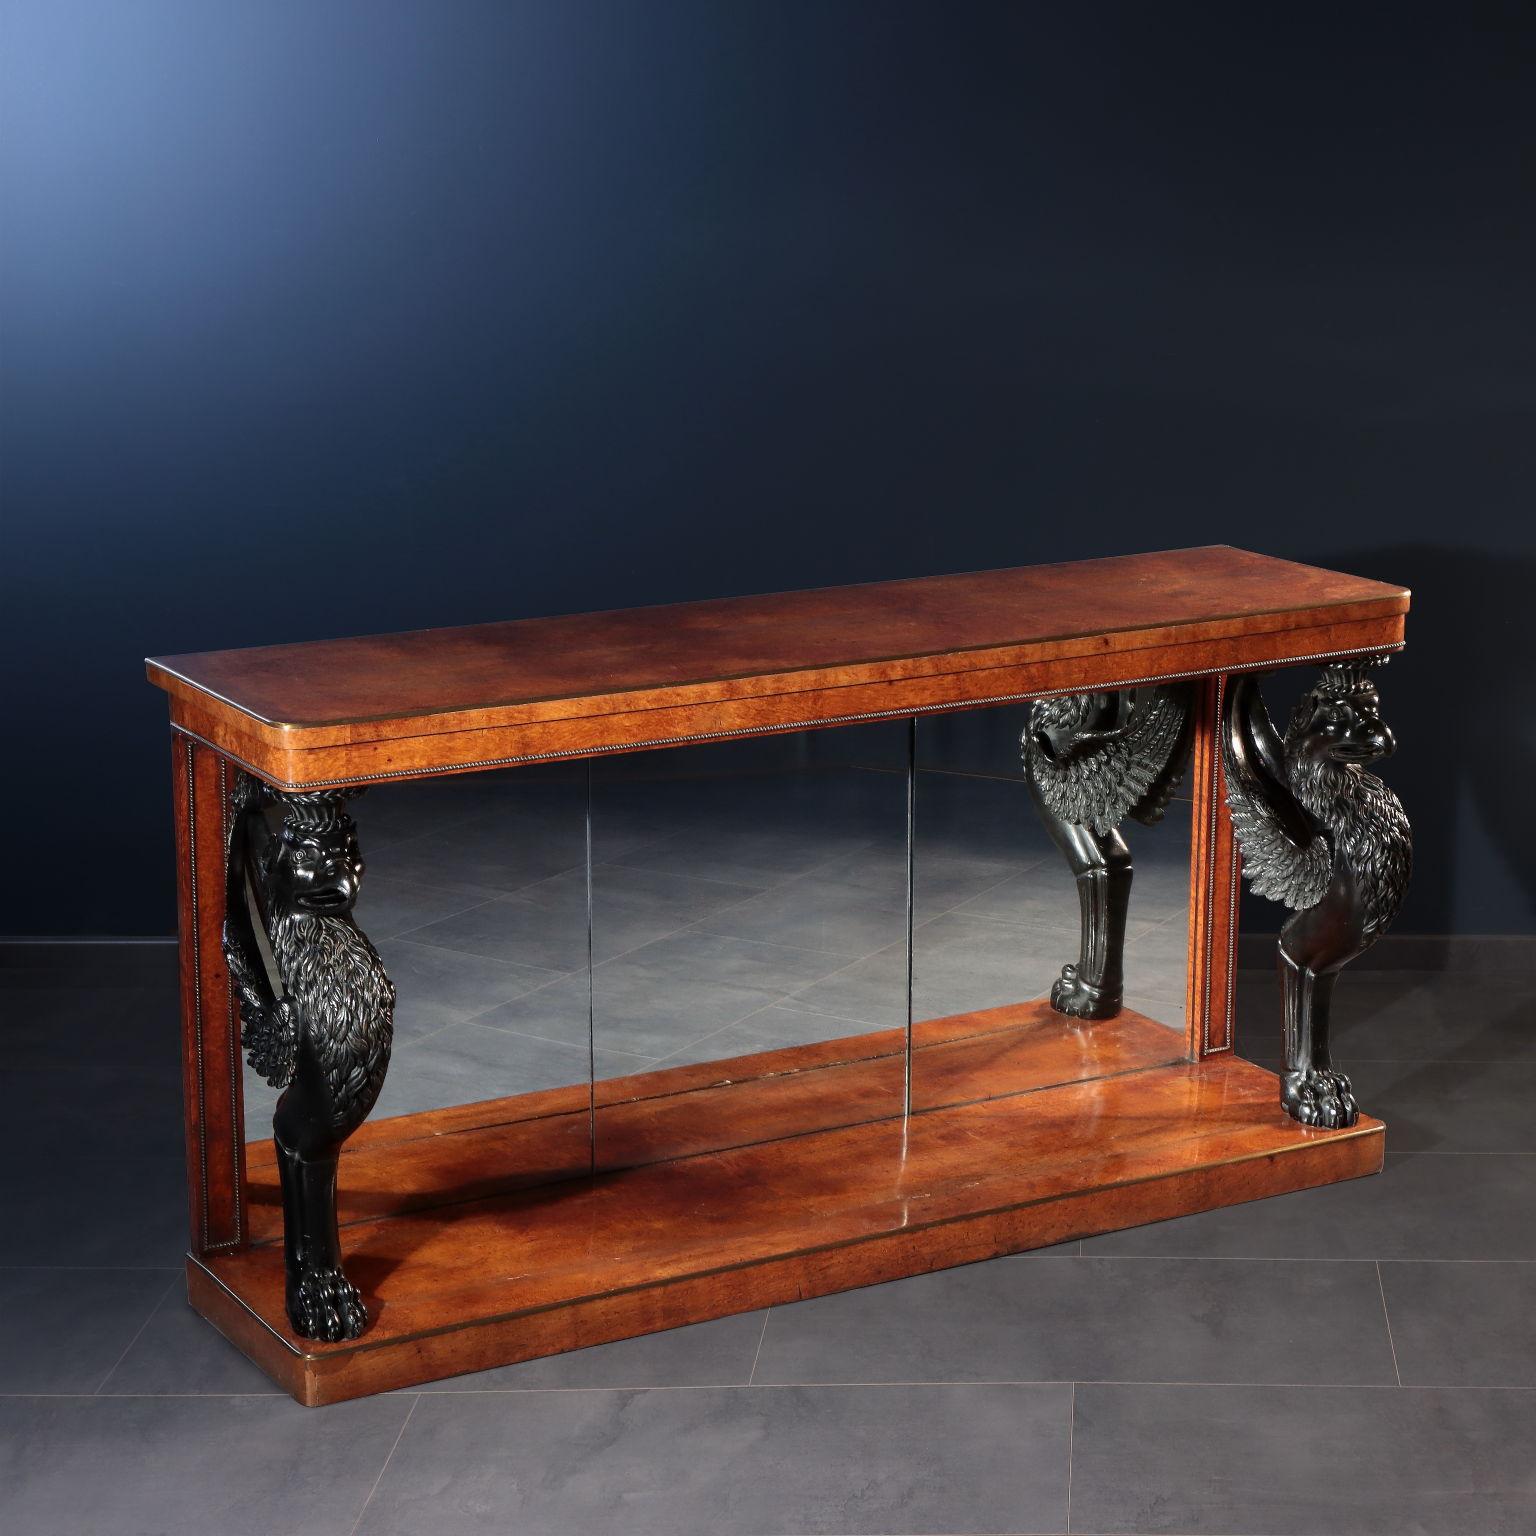 English console resting on a shelf and equipped with two monopod griffins shaped uprights; the rear panel consists of three mirror plates. Entirely veneered in amboina briar, it has a bronze frame and brass covered top edges.